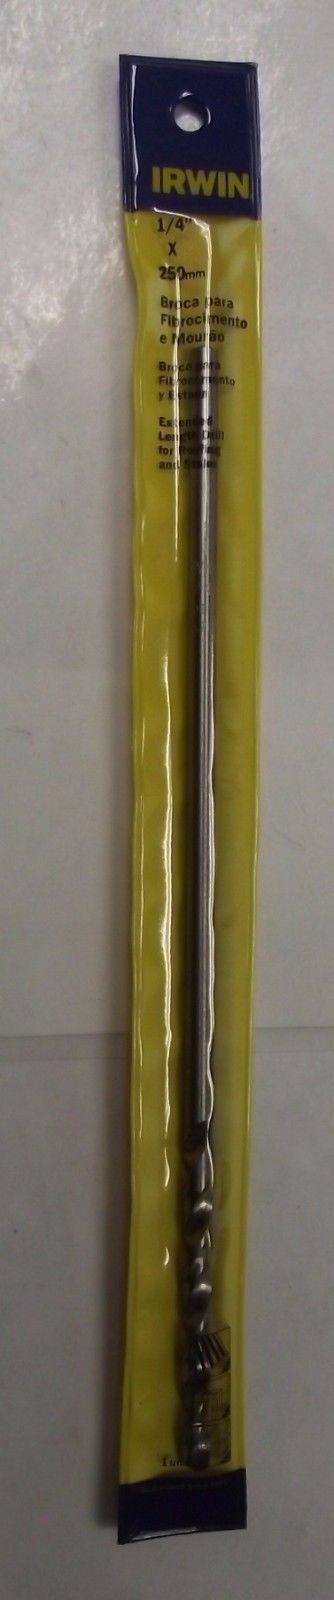 Irwin Iw1840 5179 1/4" x 9-1/2" Extended Length Drill Bit